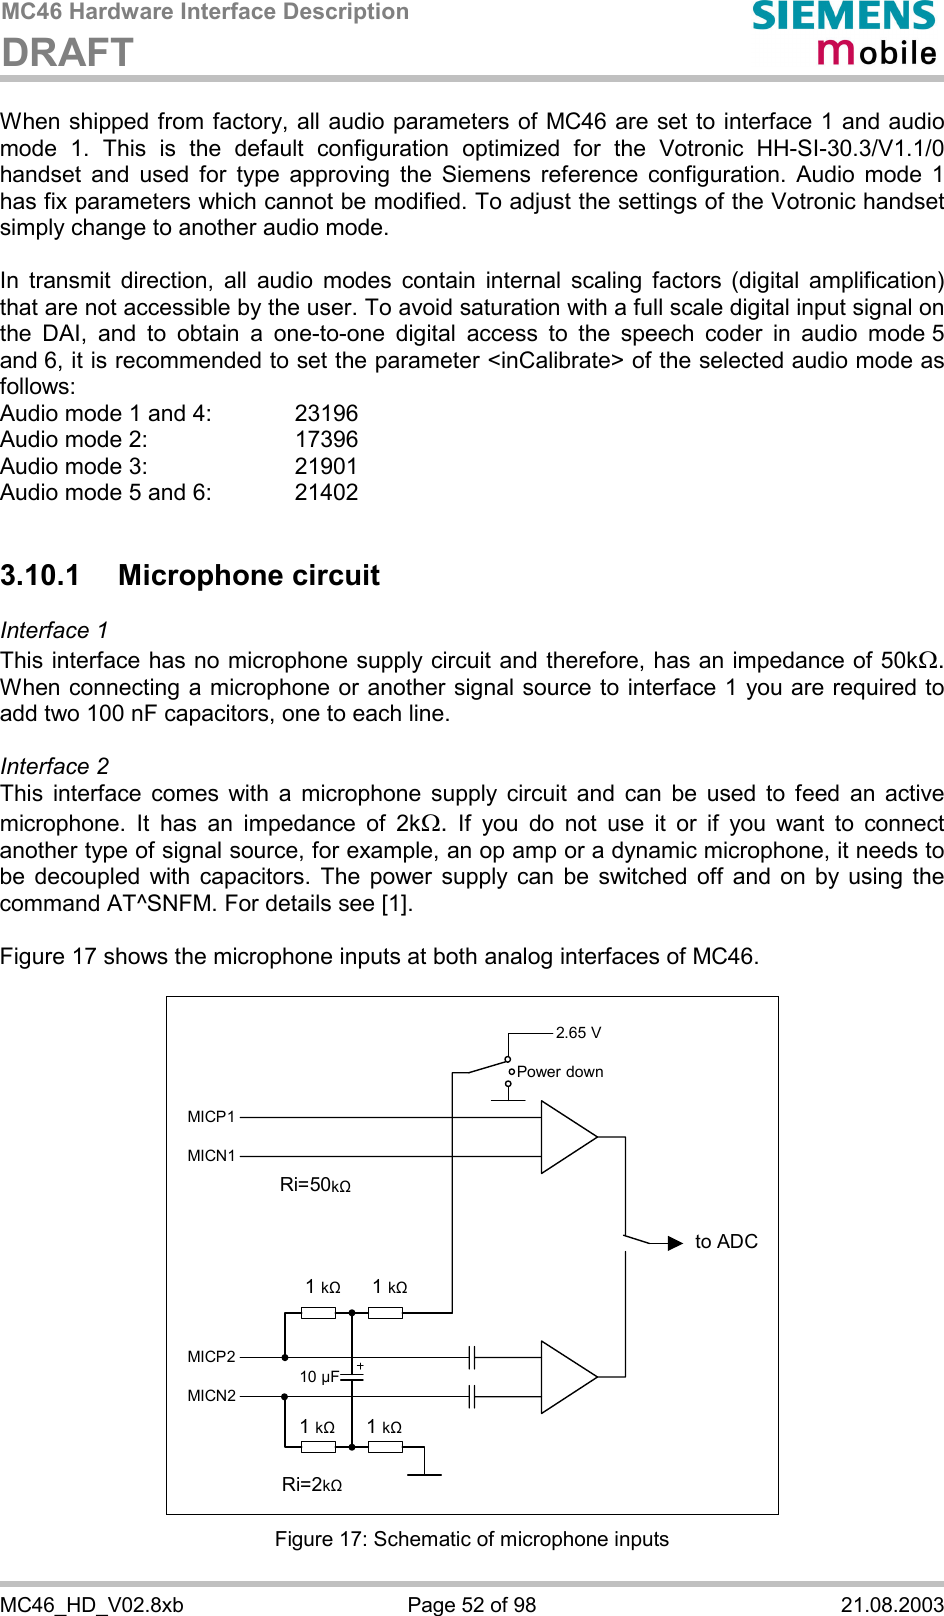 MC46 Hardware Interface Description DRAFT      MC46_HD_V02.8xb  Page 52 of 98  21.08.2003 When shipped from factory, all audio parameters of MC46 are set to interface 1 and audio mode 1. This is the default configuration optimized for the Votronic HH-SI-30.3/V1.1/0 handset and used for type approving the Siemens reference configuration. Audio mode 1 has fix parameters which cannot be modified. To adjust the settings of the Votronic handset simply change to another audio mode.  In transmit direction, all audio modes contain internal scaling factors (digital amplification) that are not accessible by the user. To avoid saturation with a full scale digital input signal on the DAI, and to obtain a one-to-one digital access to the speech coder in audio mode 5 and 6, it is recommended to set the parameter &lt;inCalibrate&gt; of the selected audio mode as follows: Audio mode 1 and 4:    23196 Audio mode 2:     17396 Audio mode 3:    21901 Audio mode 5 and 6:    21402  3.10.1 Microphone circuit Interface 1  This interface has no microphone supply circuit and therefore, has an impedance of 50kW. When connecting a microphone or another signal source to interface 1 you are required to add two 100 nF capacitors, one to each line.   Interface 2 This interface comes with a microphone supply circuit and can be used to feed an active microphone. It has an impedance of 2kW. If you do not use it or if you want to connect another type of signal source, for example, an op amp or a dynamic microphone, it needs to be decoupled with capacitors. The power supply can be switched off and on by using the command AT^SNFM. For details see [1].  Figure 17 shows the microphone inputs at both analog interfaces of MC46.    2.65 V to ADC Power downMICP1MICN1 MICP2MICN2 1 k&quot;   1 k&quot;1 k&quot; 1 k&quot;10 µF Ri=50k&quot; Ri=2k&quot;  Figure 17: Schematic of microphone inputs 